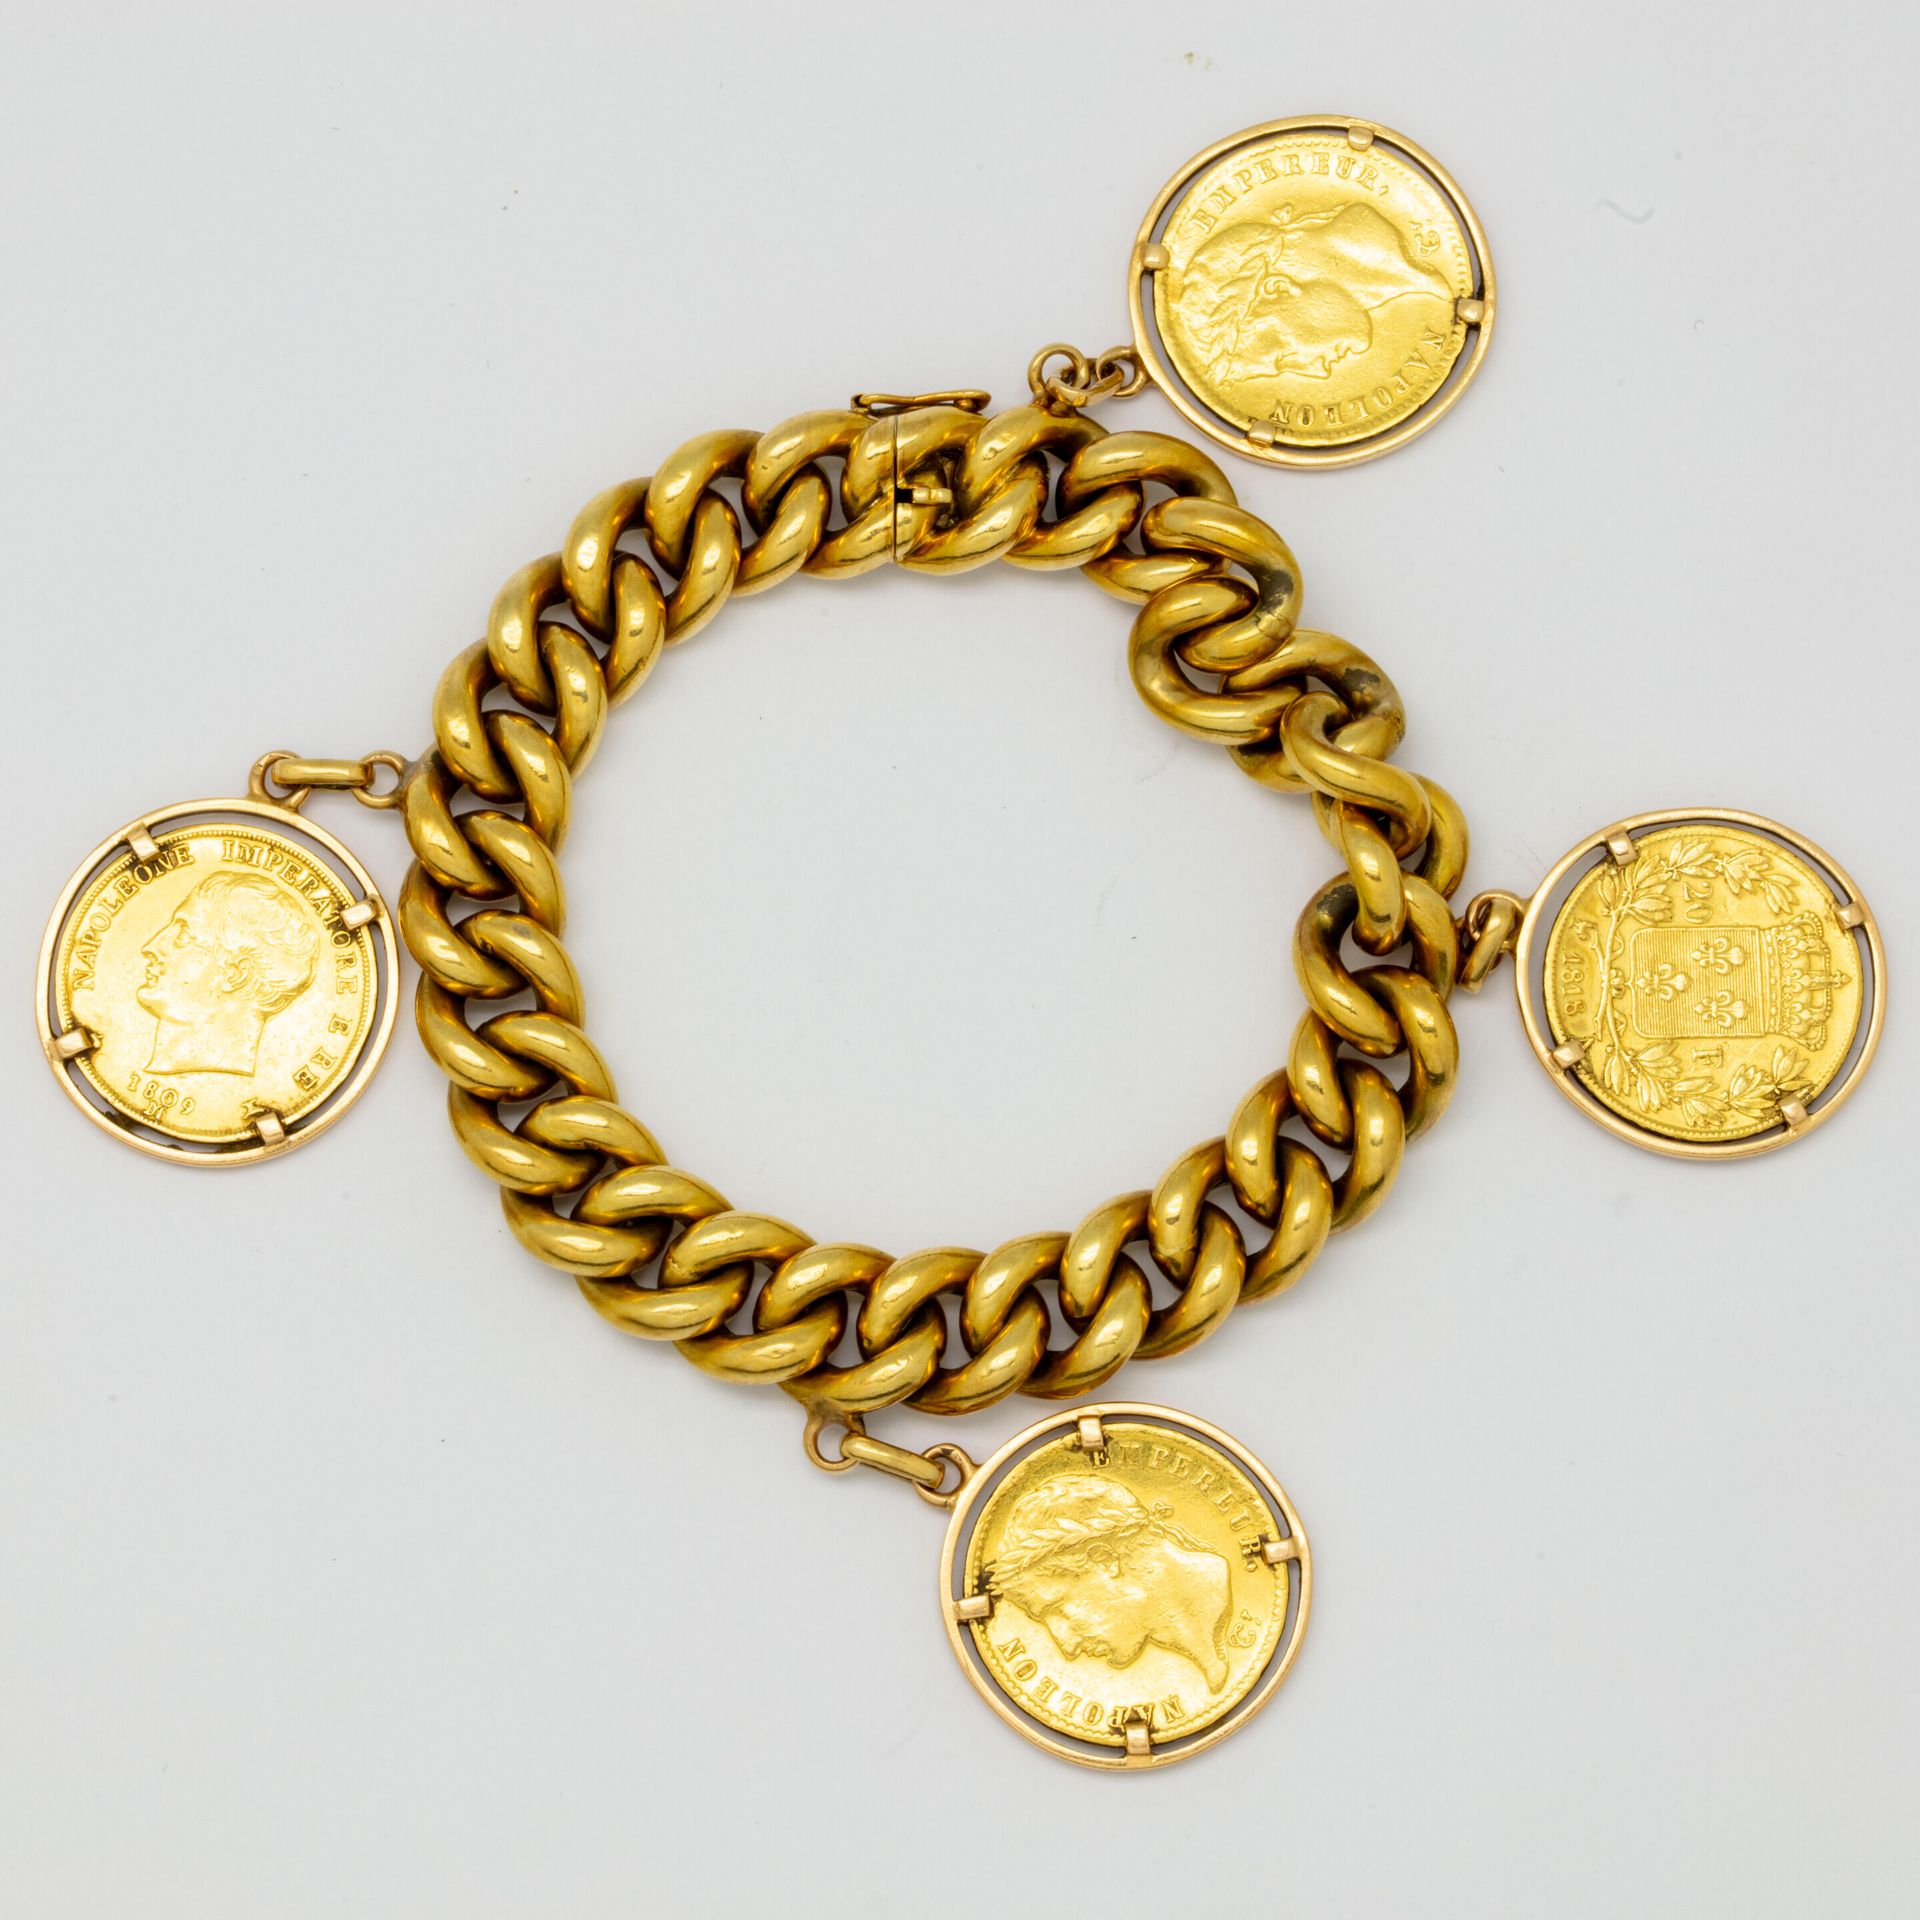 Null Bracelet with big links in yellow gold, decorated with gold coins including&hellip;